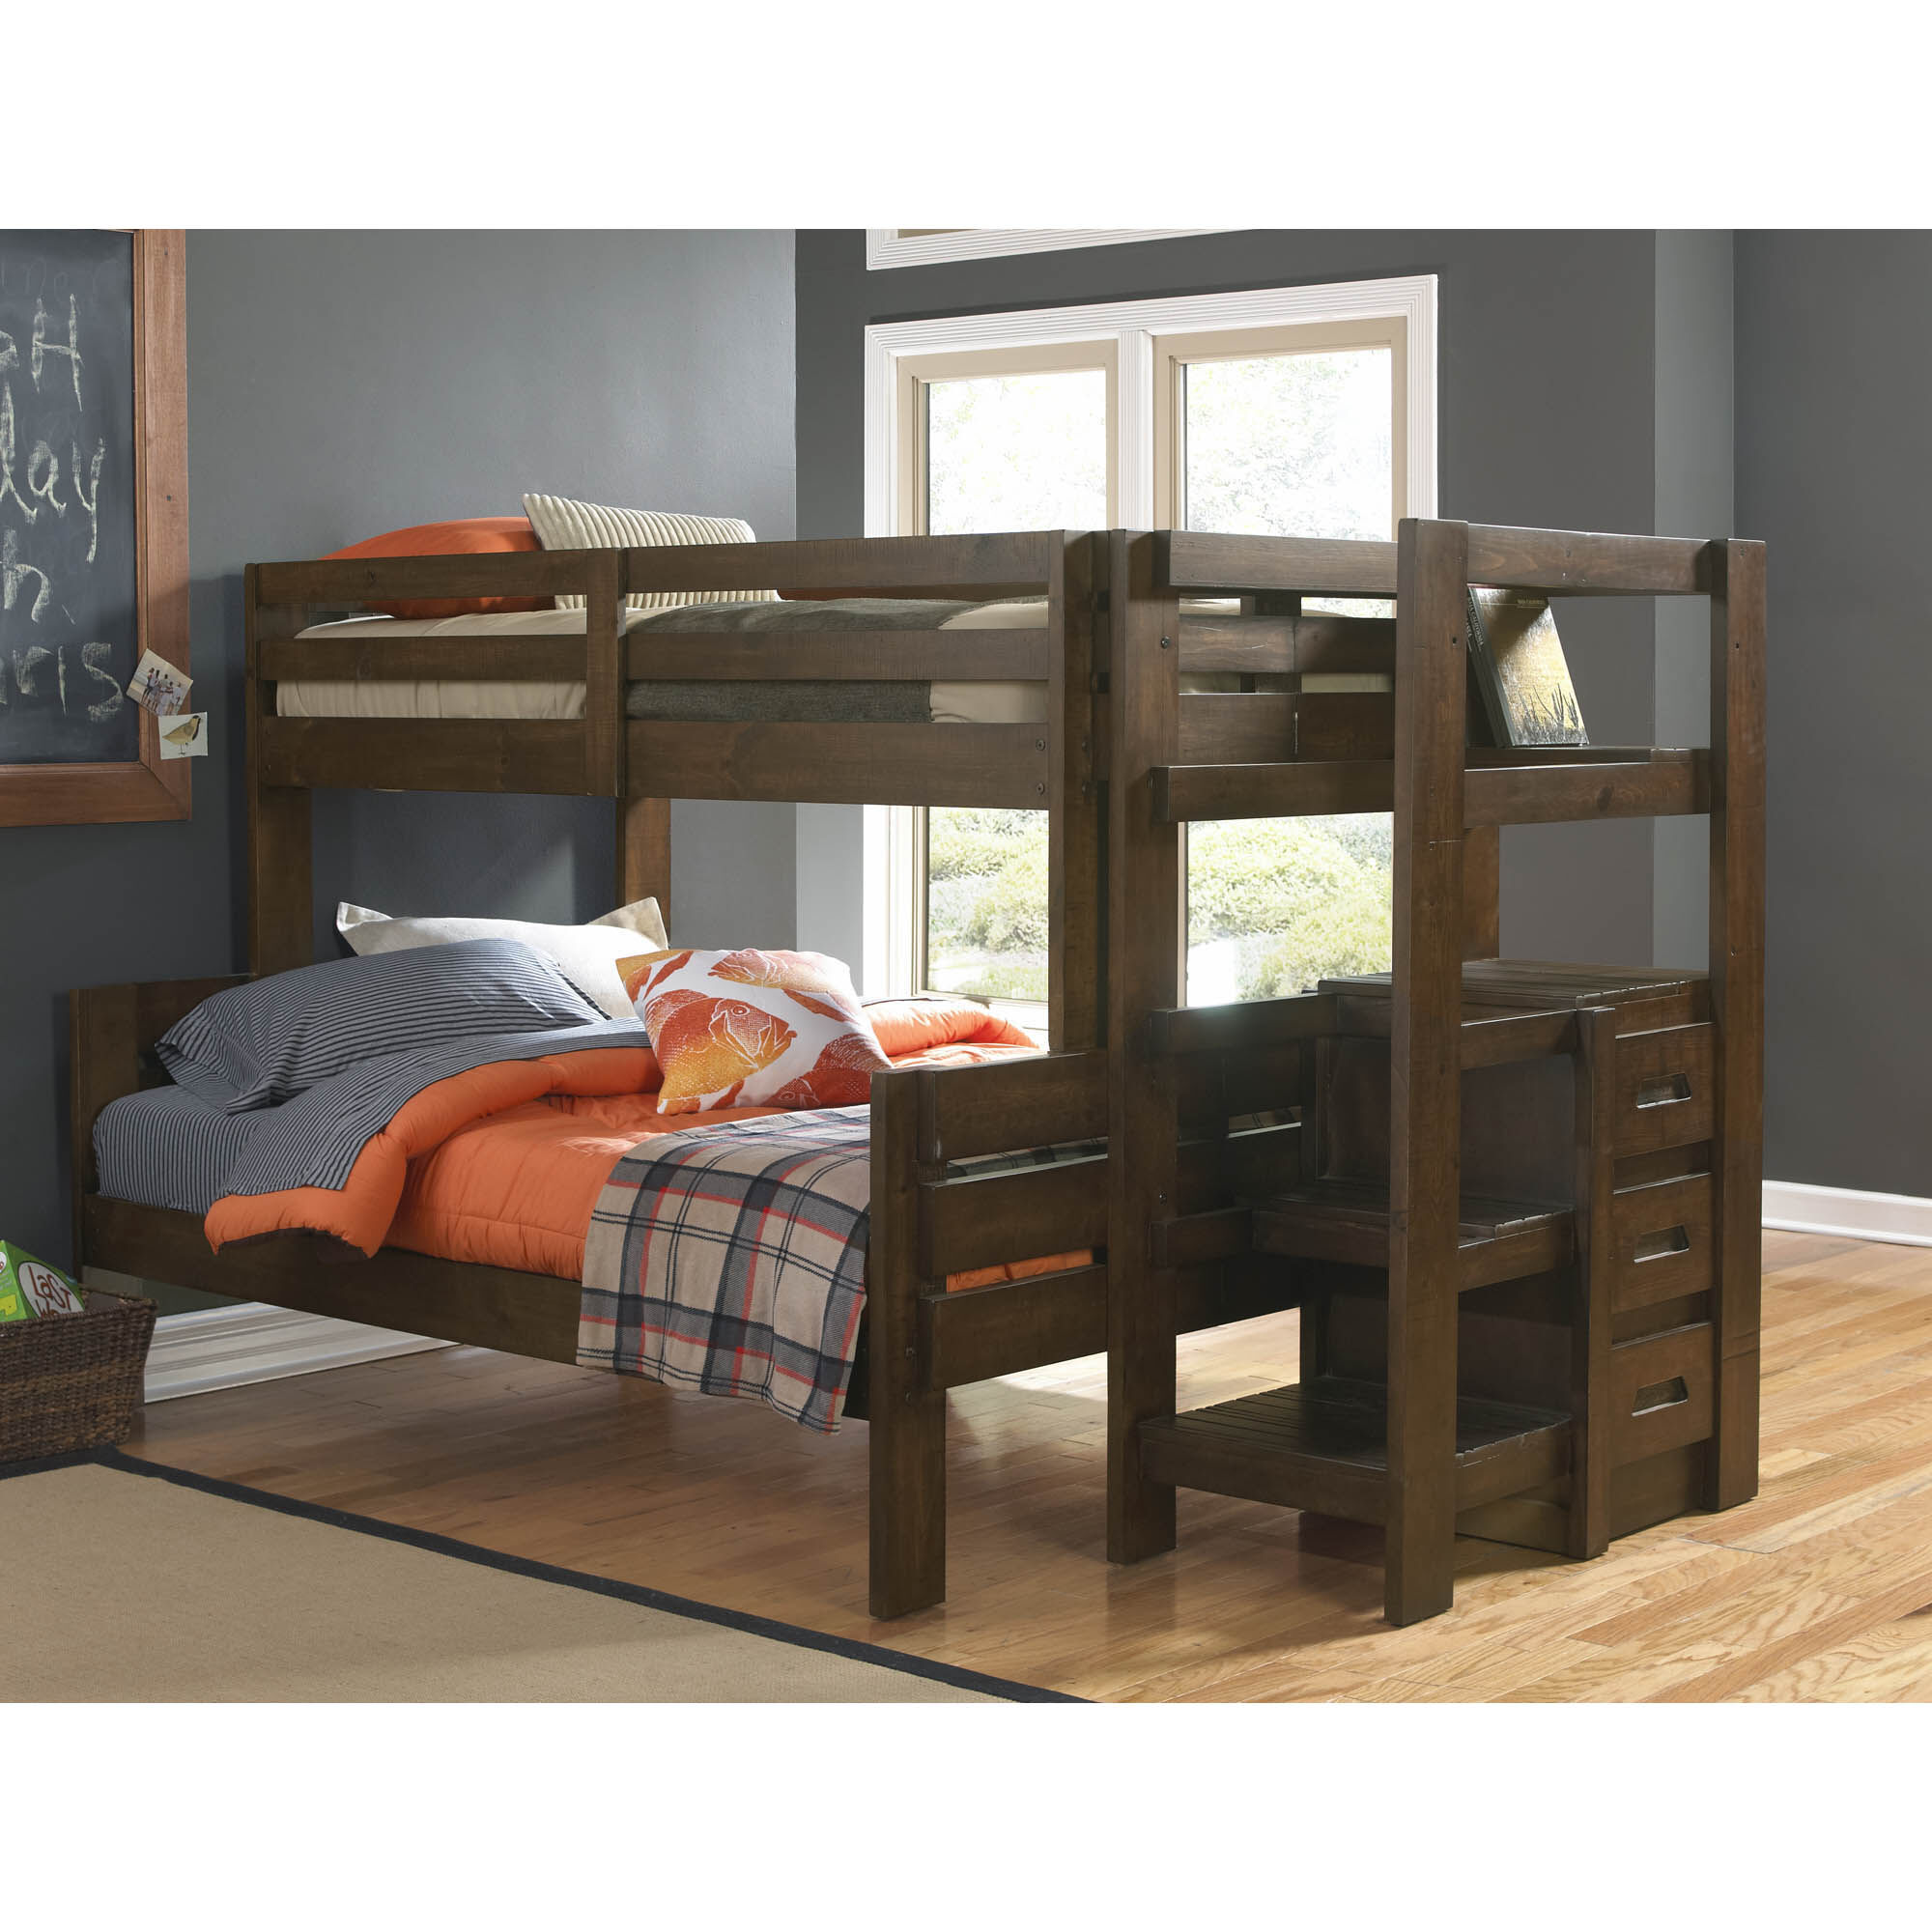 cheapest bunk beds near me